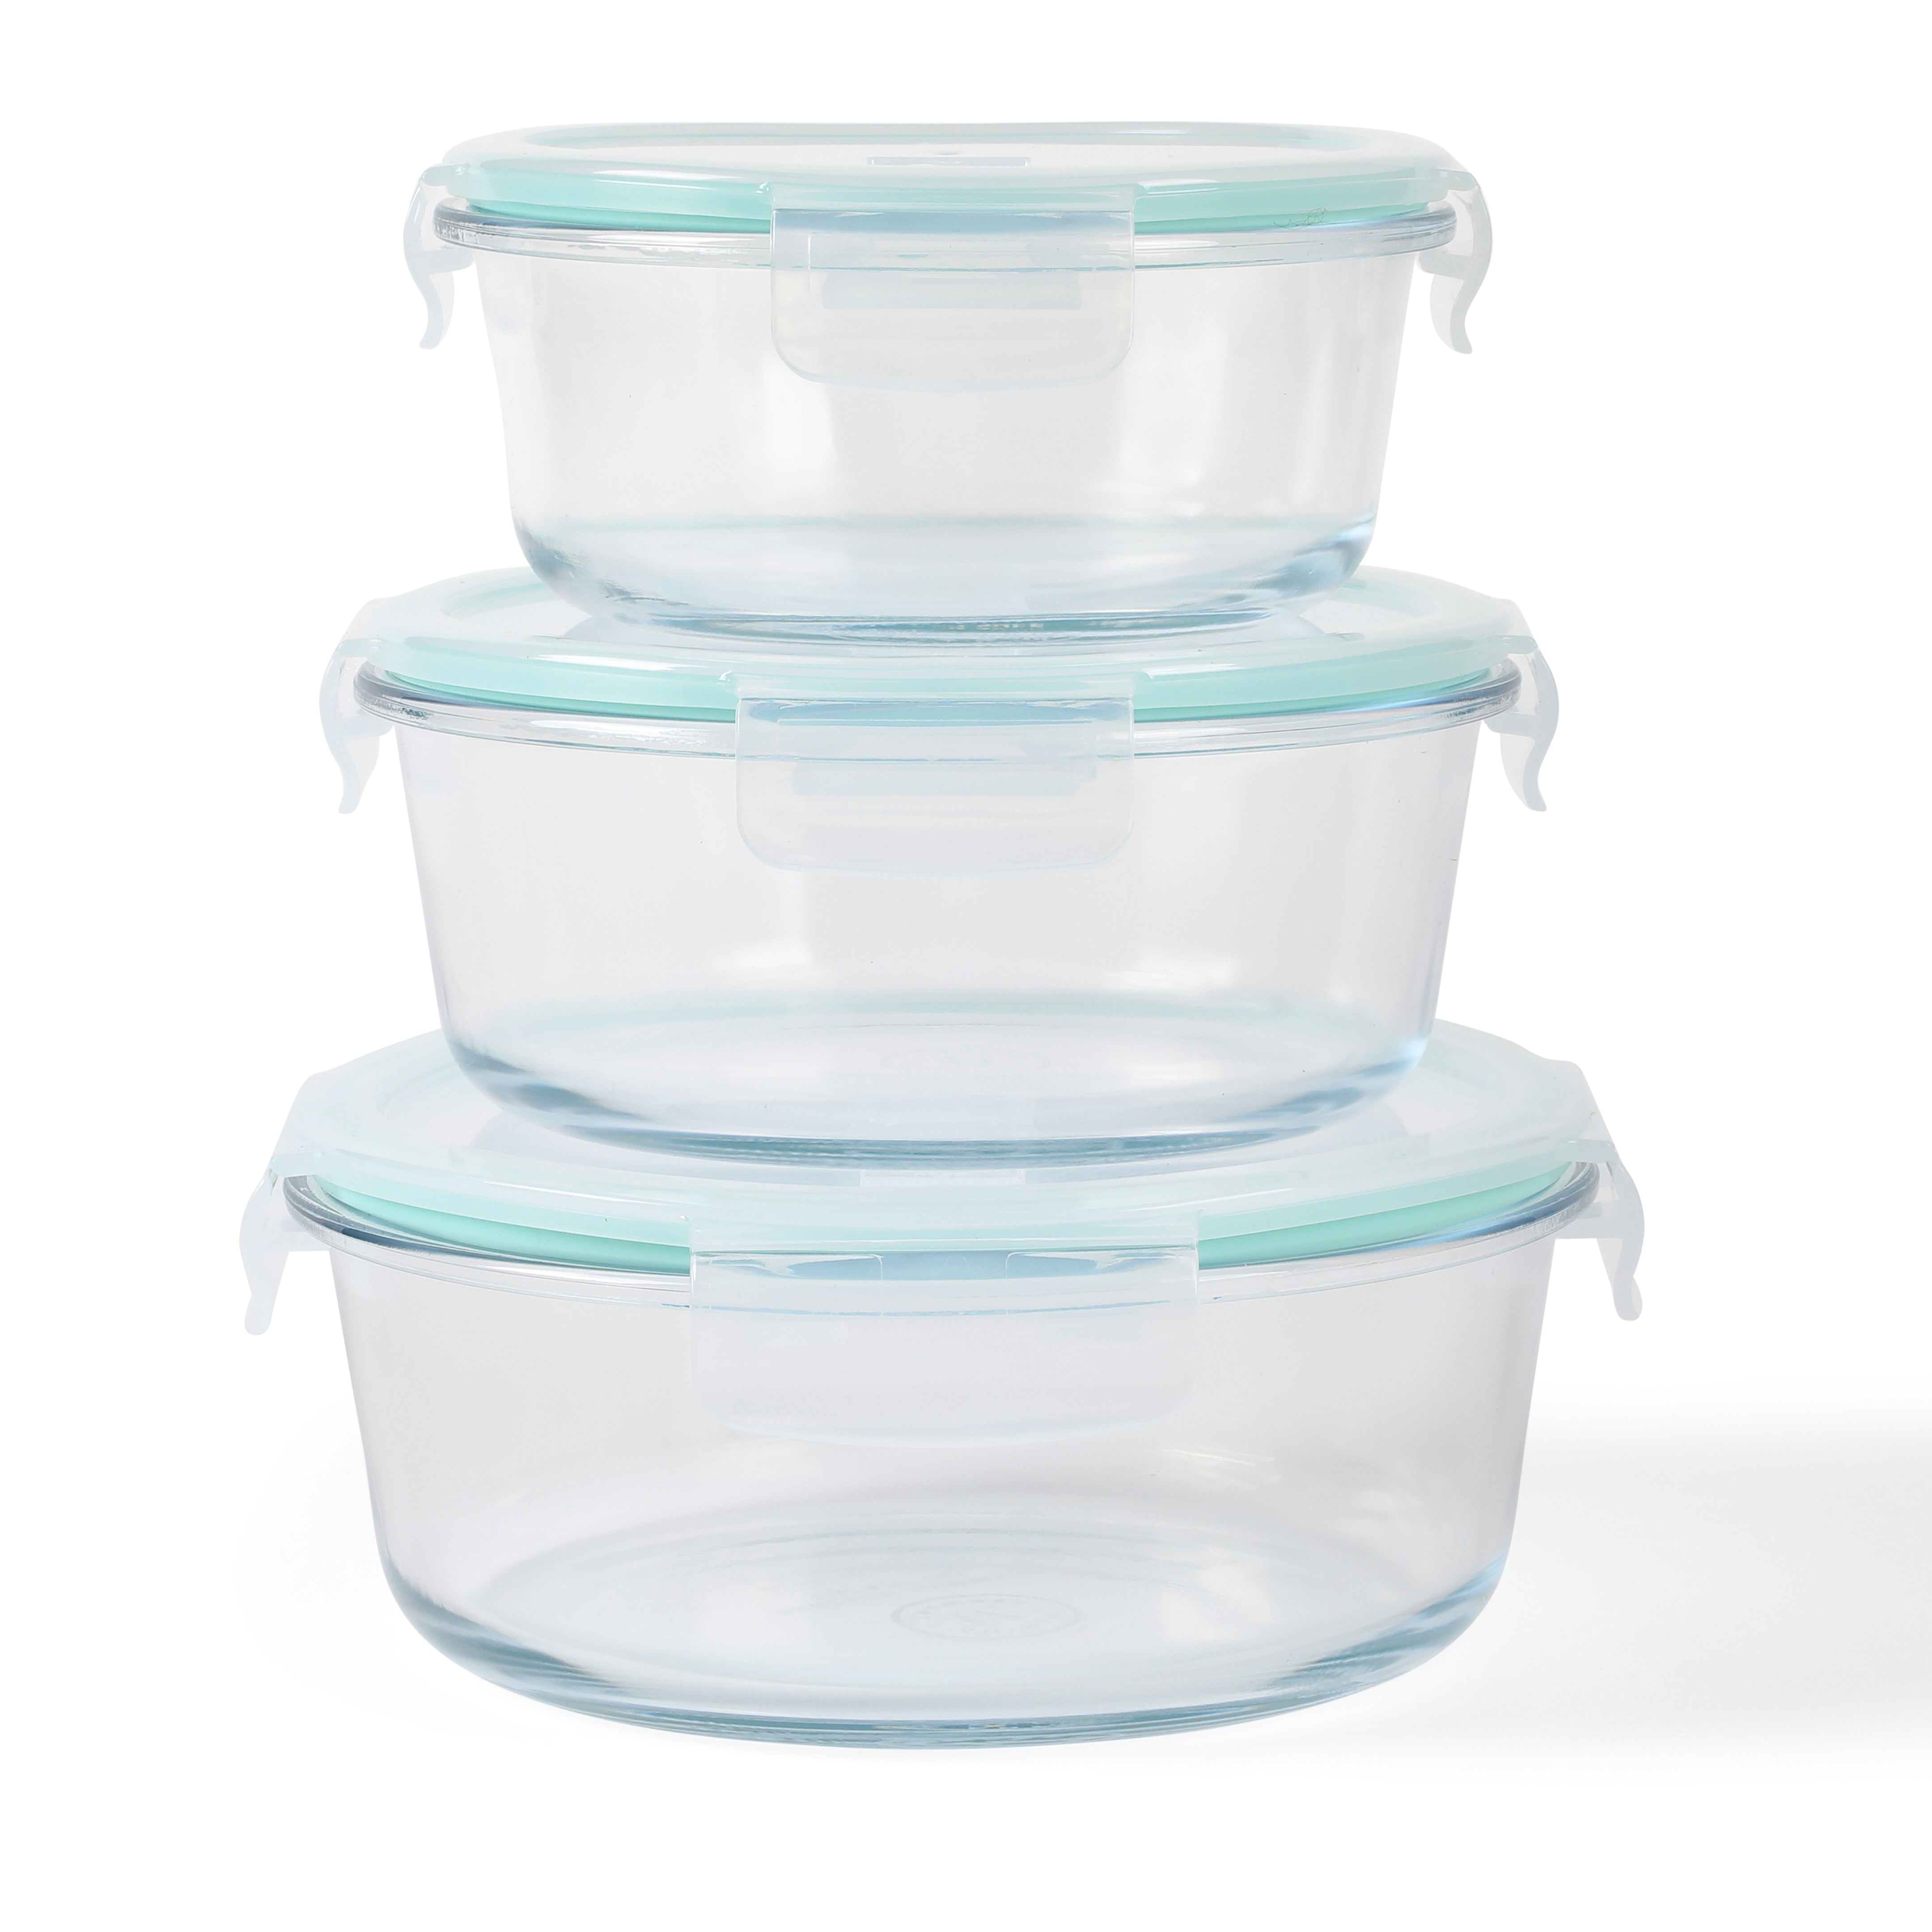 Pyrex Glass Containers Storage with Vented Lid Meal Food Cook and